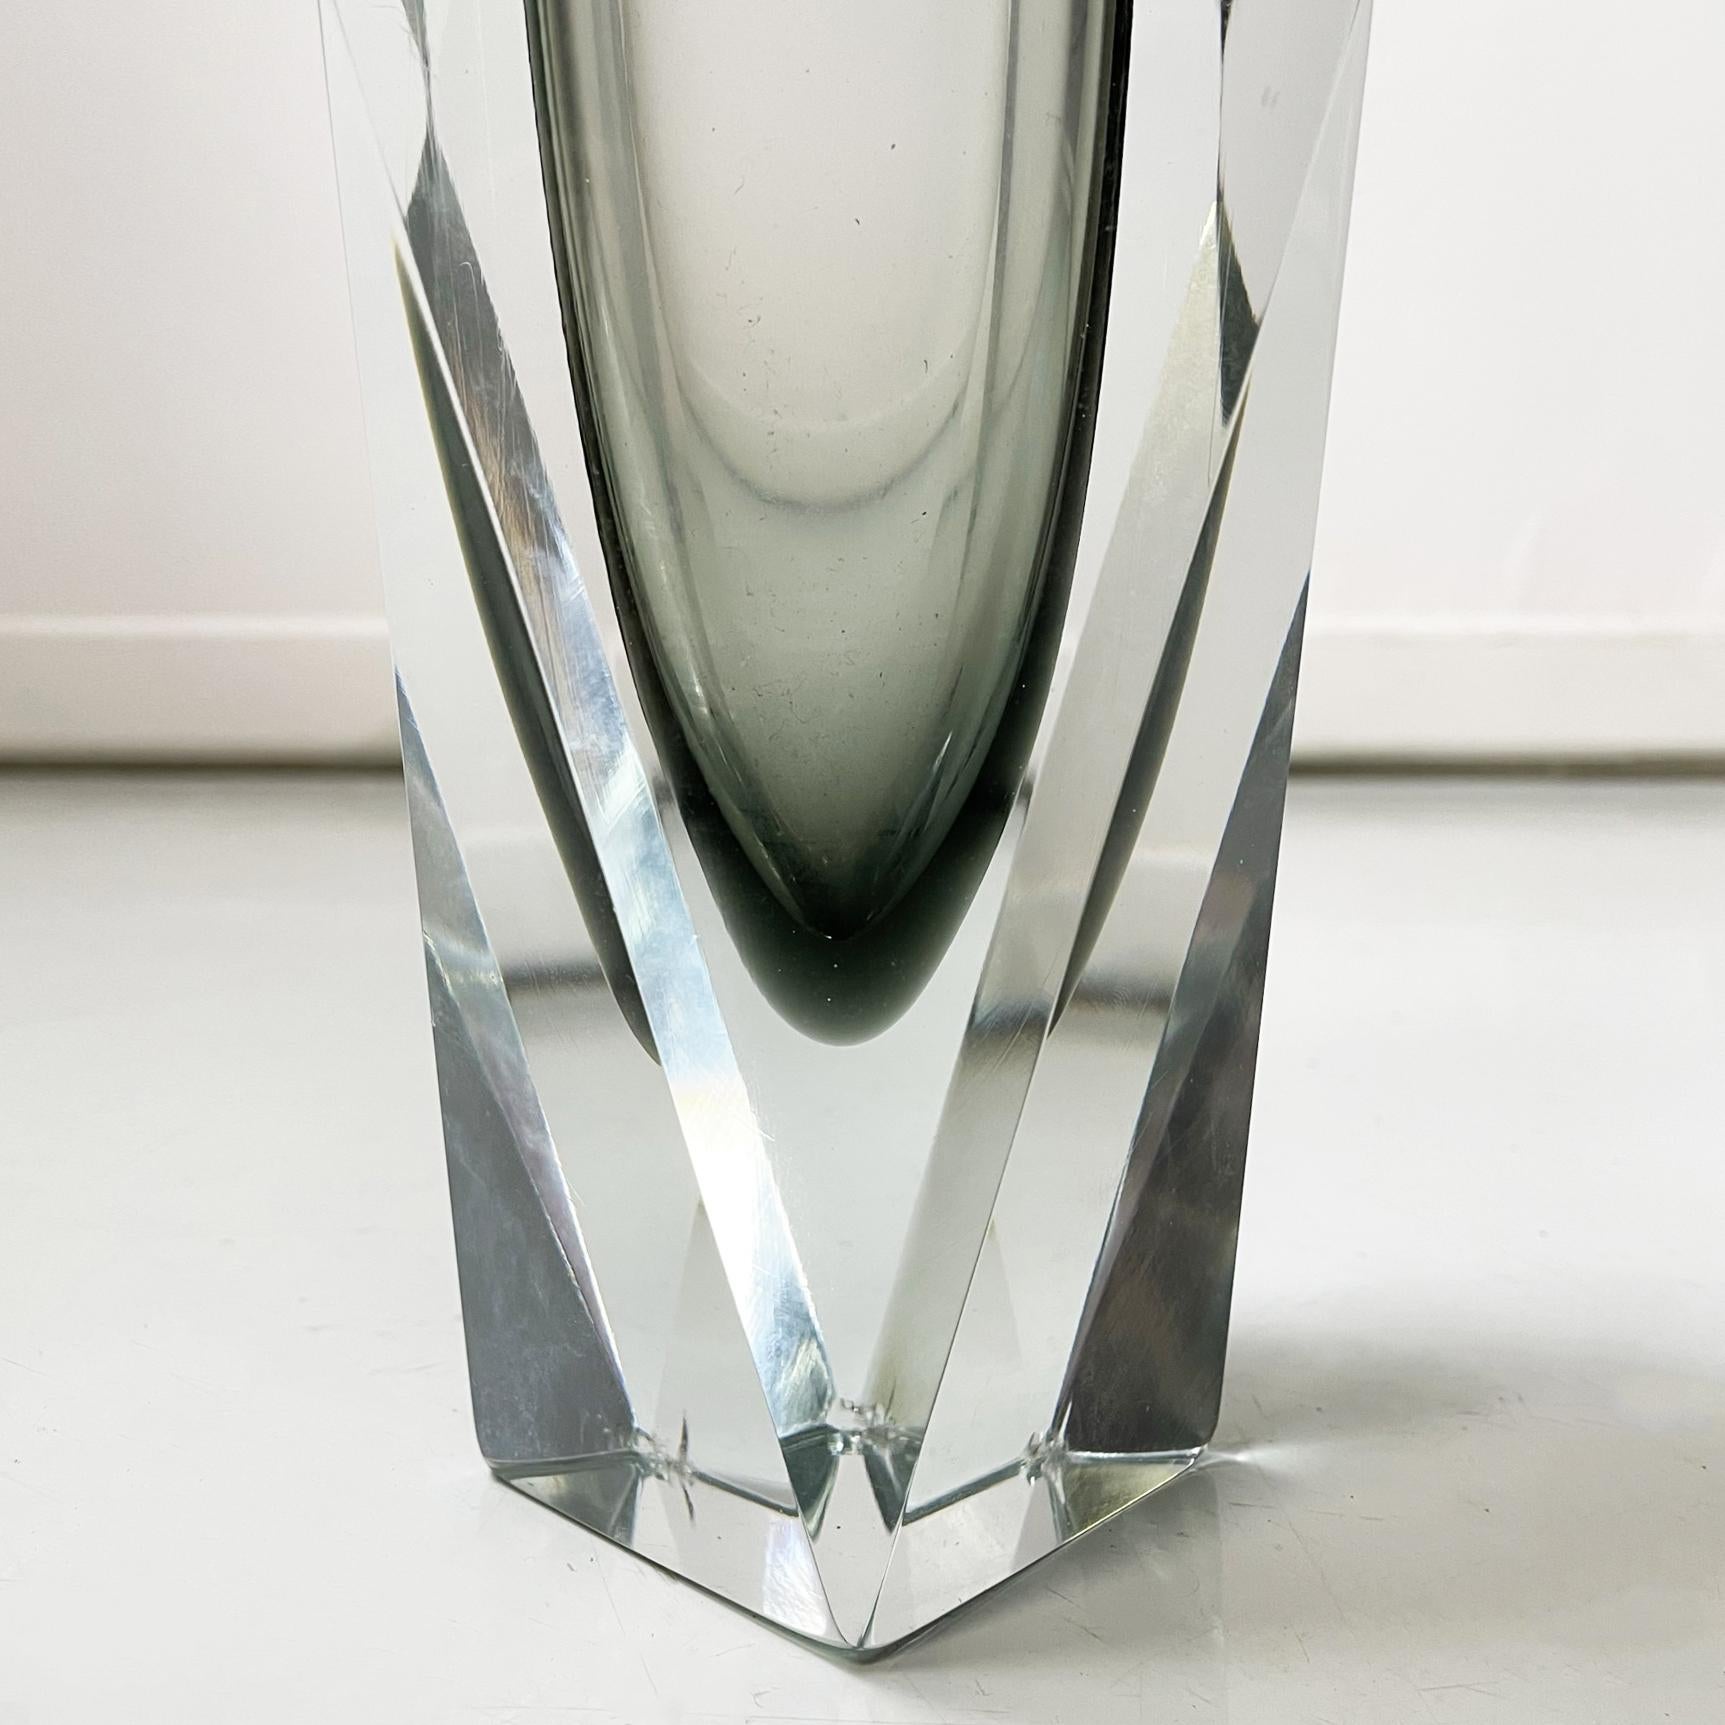 Italian Modern Vase in Grey Murano Glass from the I Sommersi Series, 1970s For Sale 5